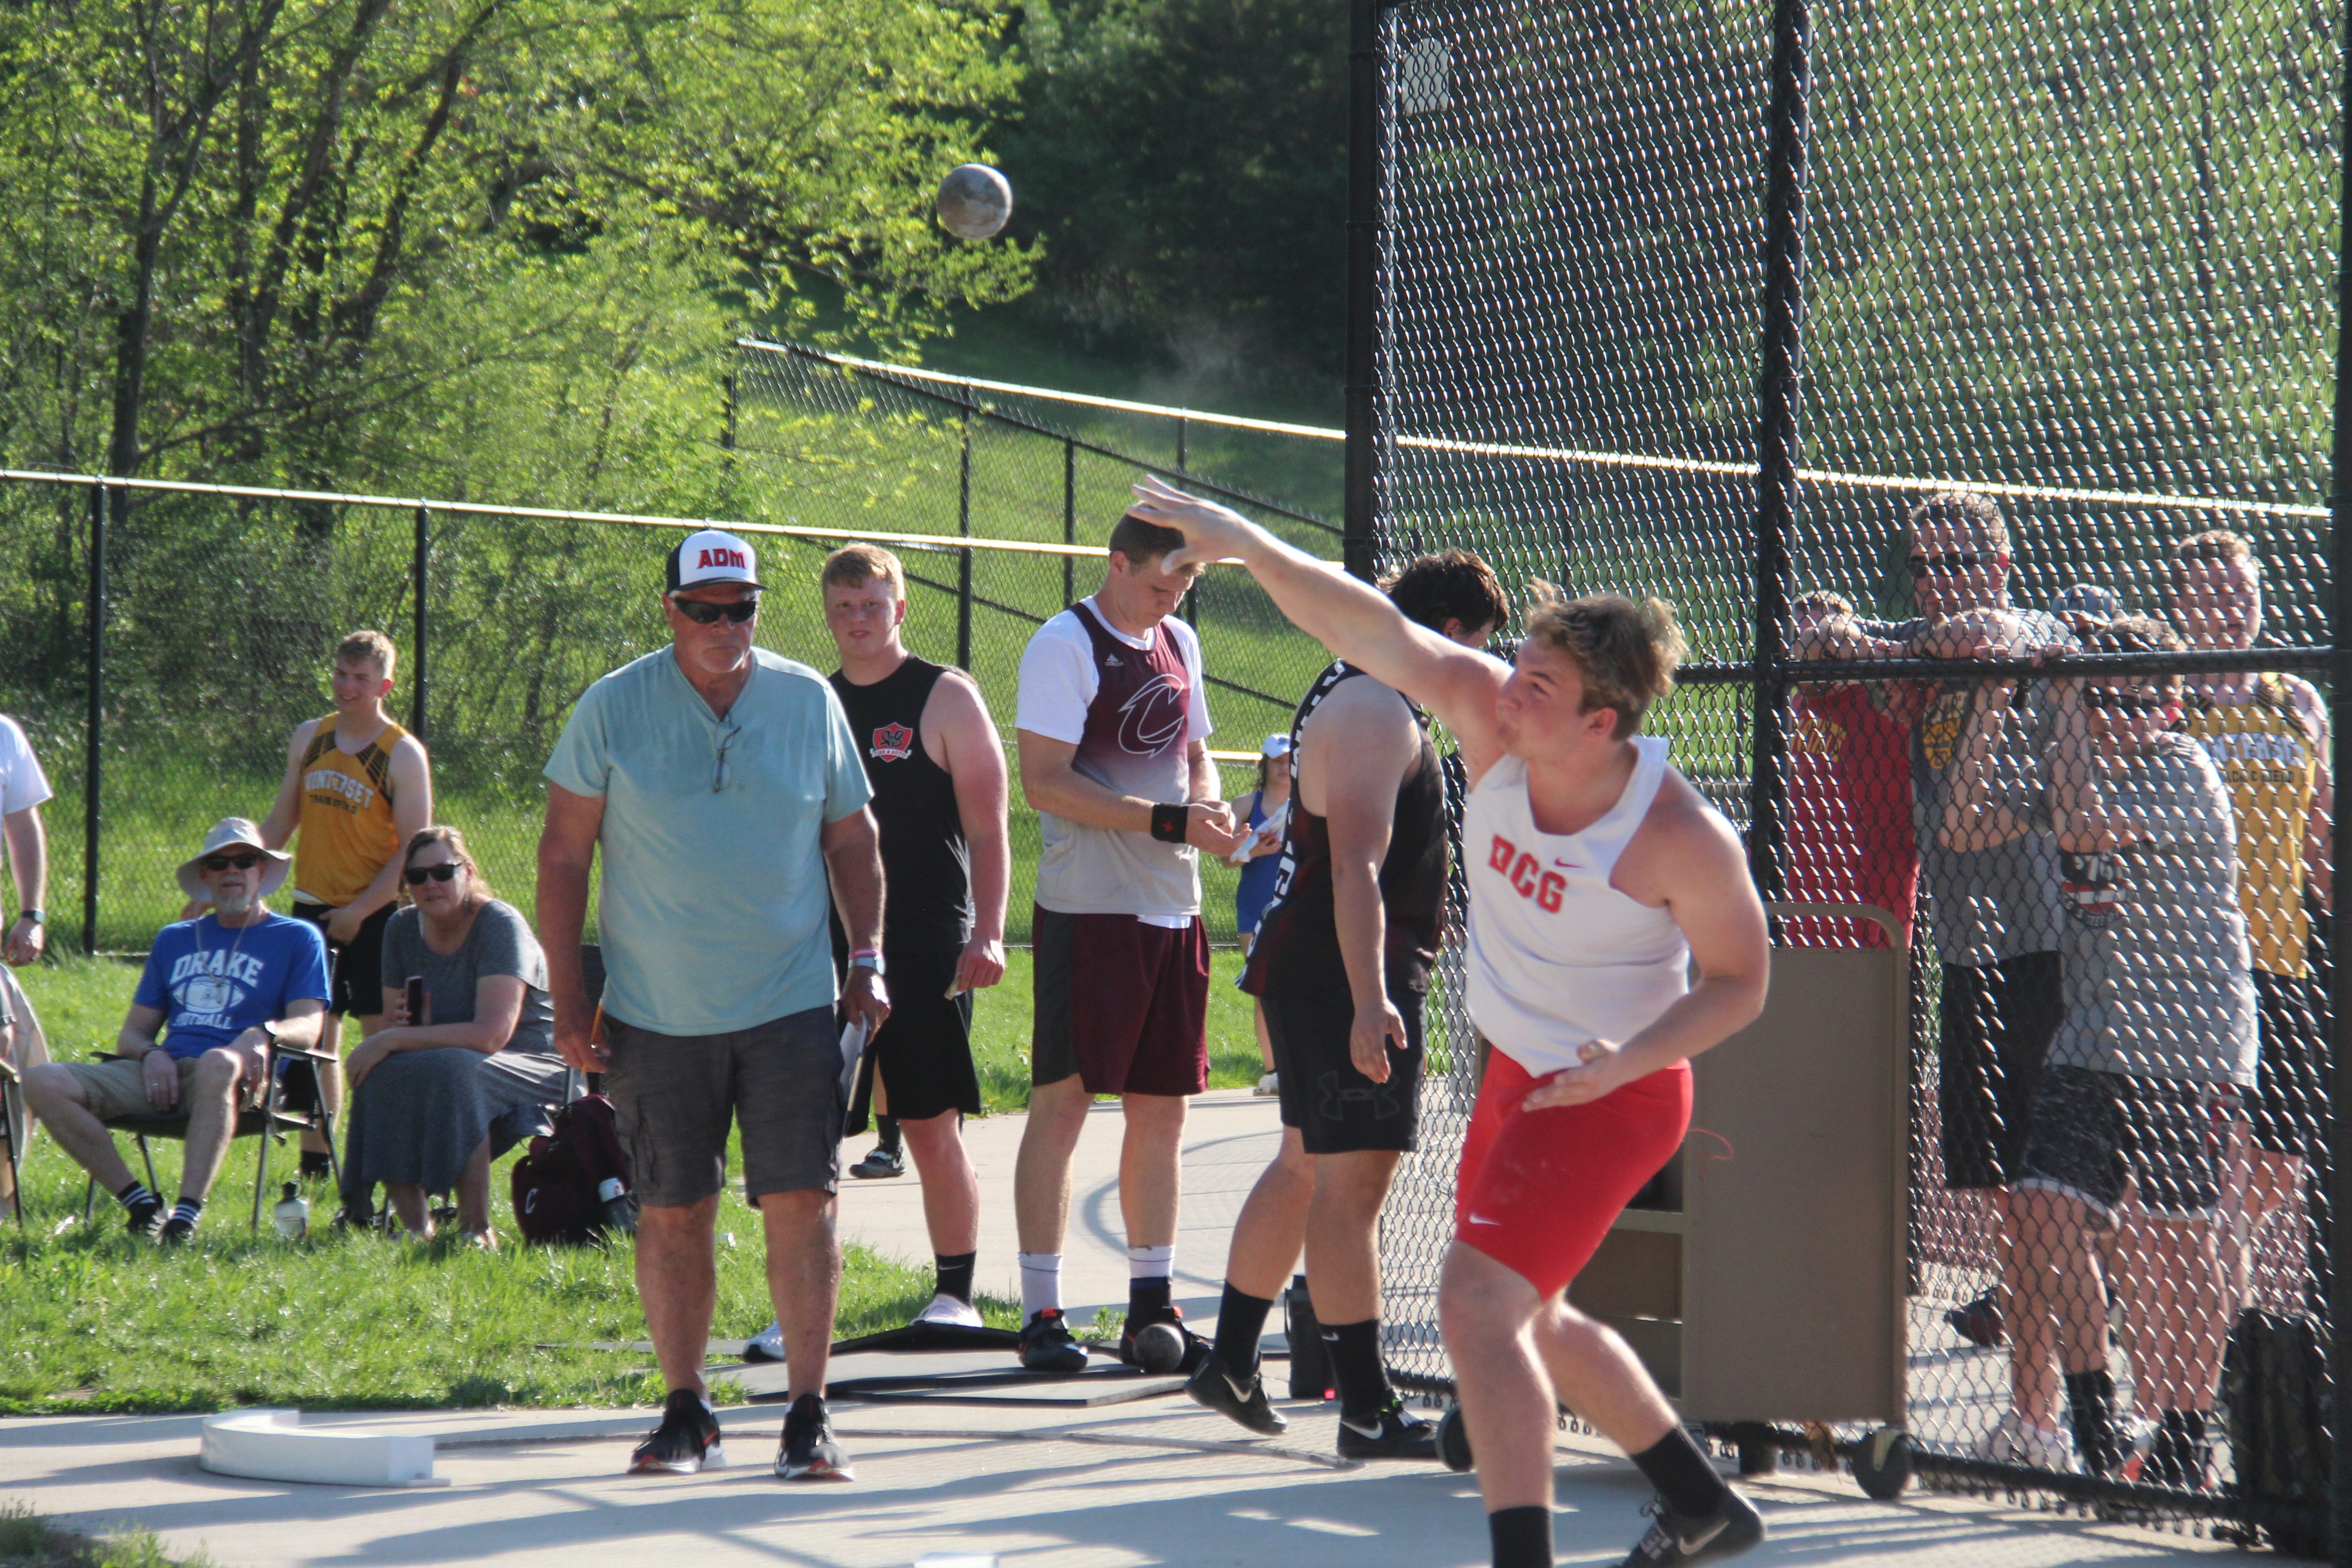 DCG's Aidan Charlson competes in the shot put during the 3A state qualifying track meet on Thursday, May 12, 2022, in Adel.